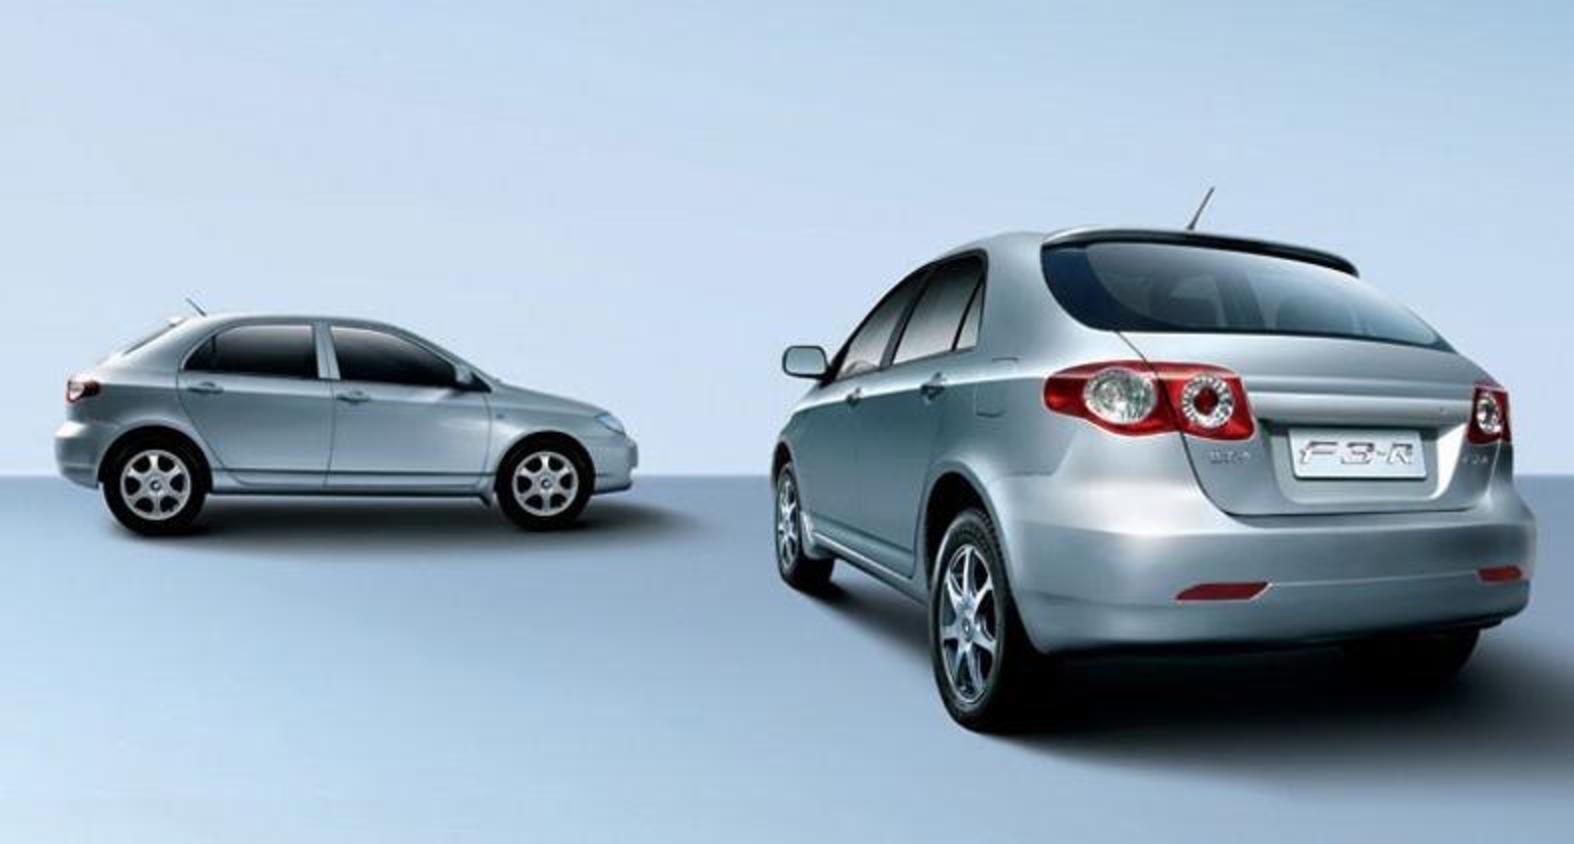 2009 BYD F3R launched on Feb. 09 - China Car Fans